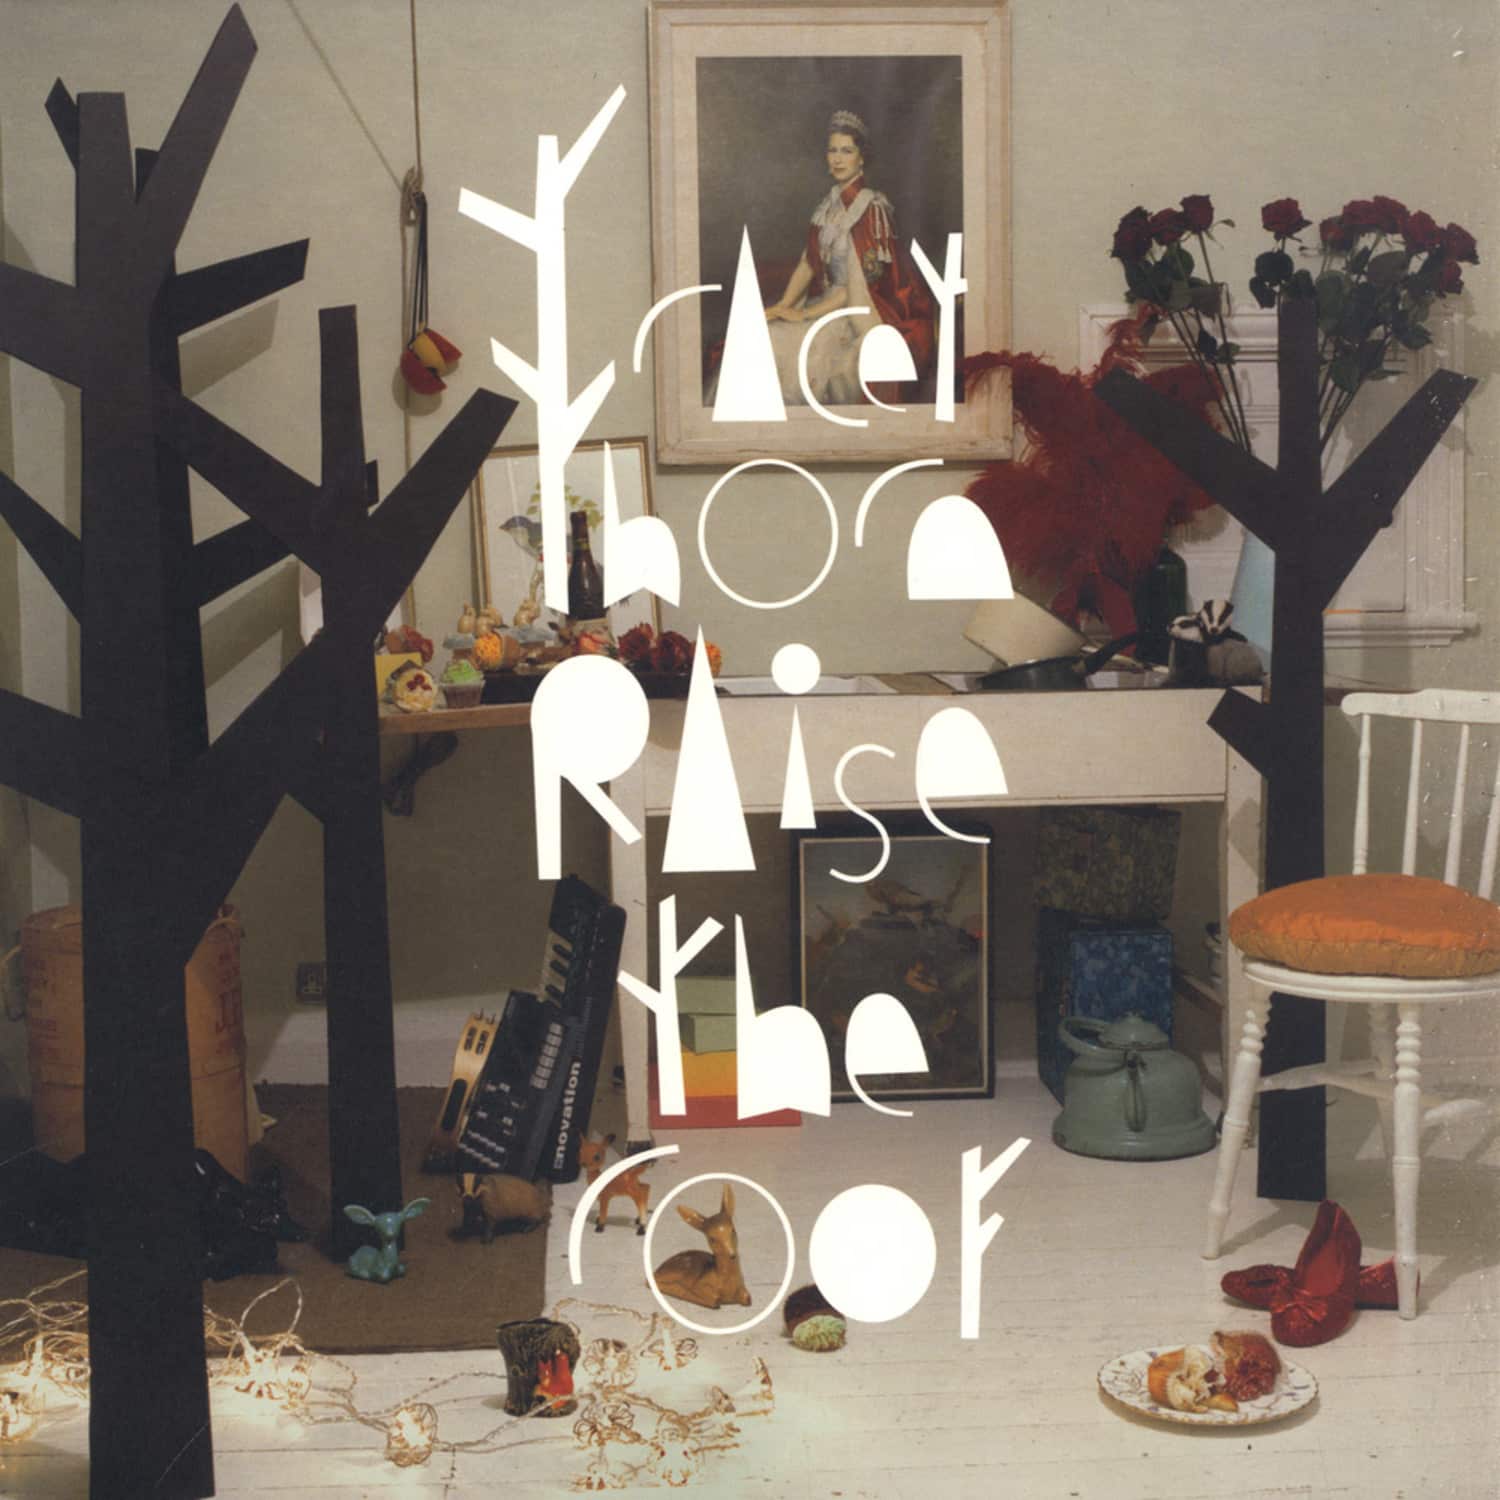 Tracey Thorn - RAISE THE ROOF RMX